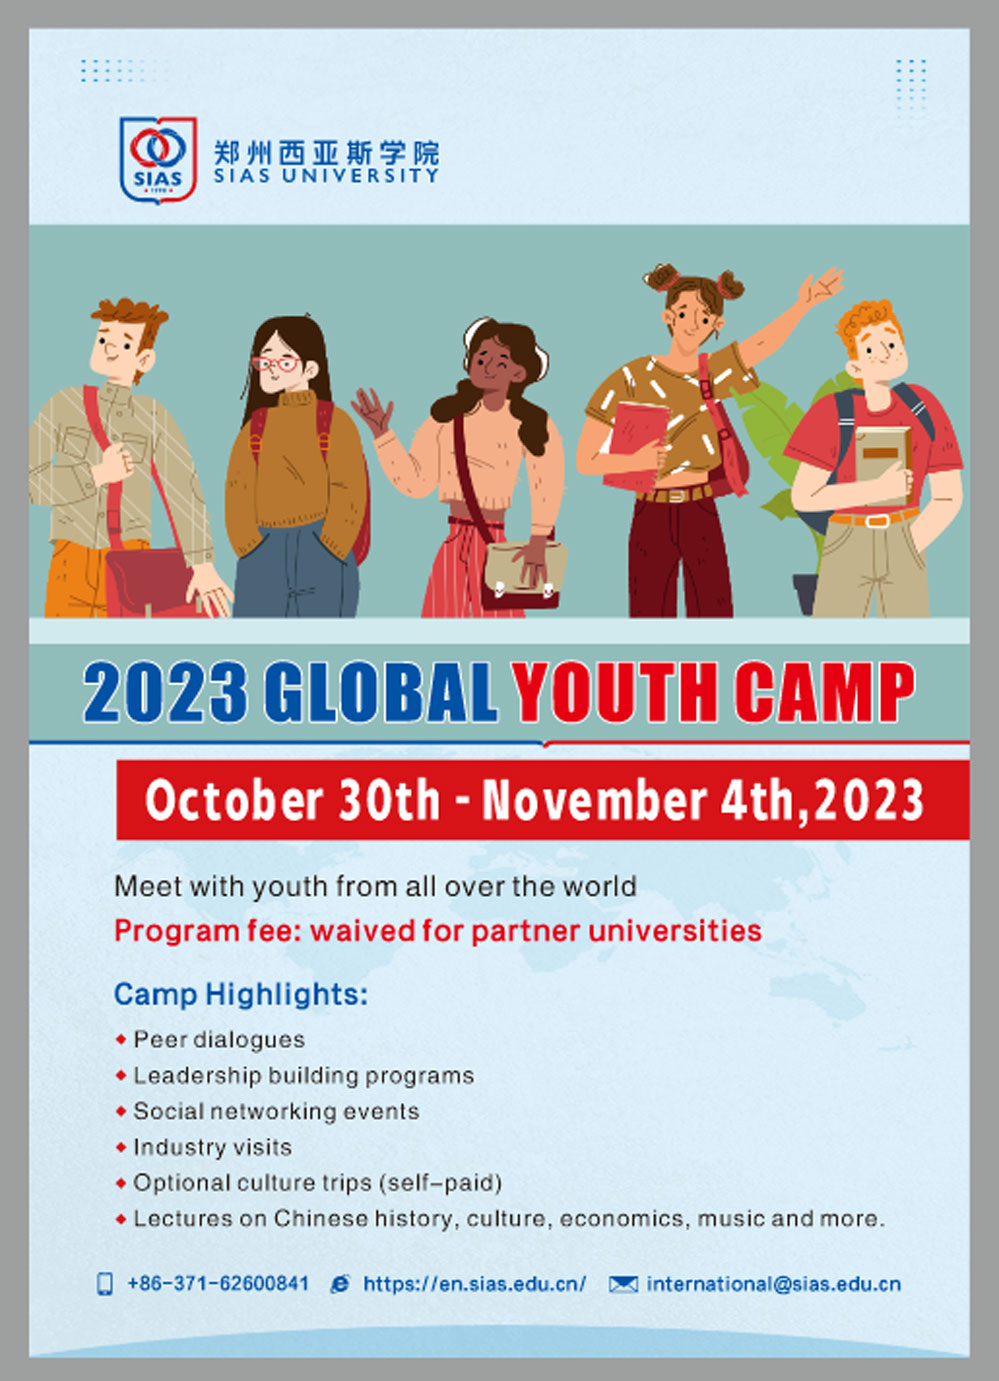 Invitation to the 2023 Global Youth Camp - Sias University